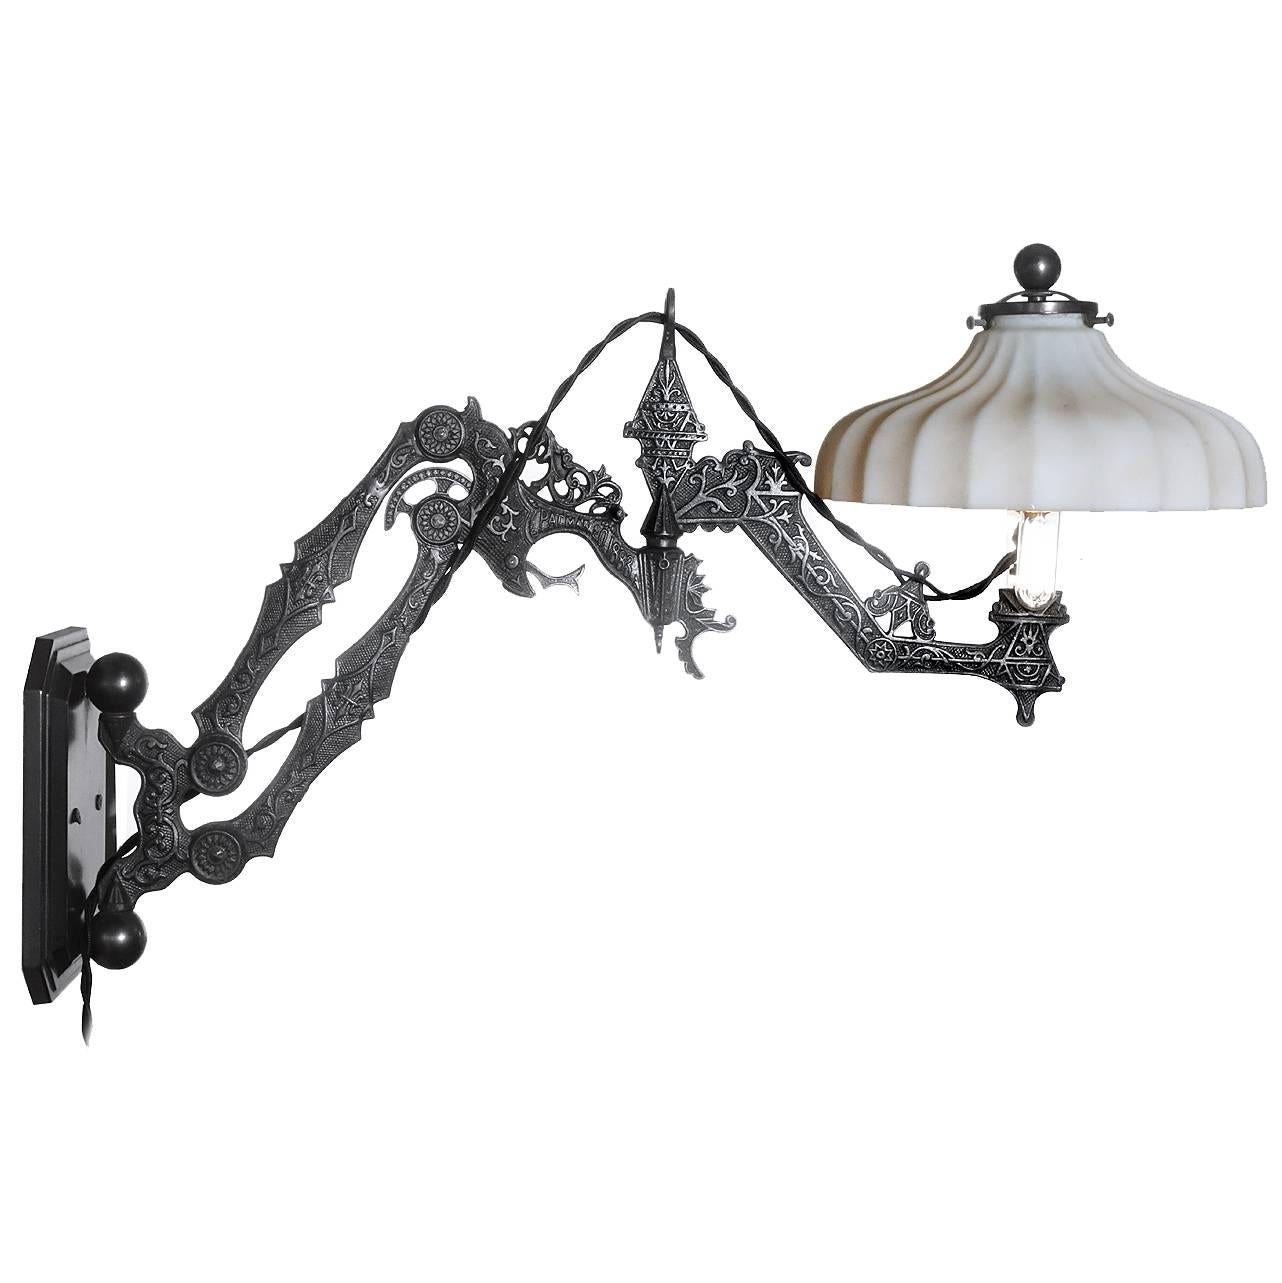 Ornate Articulated Arm Wall Lamp